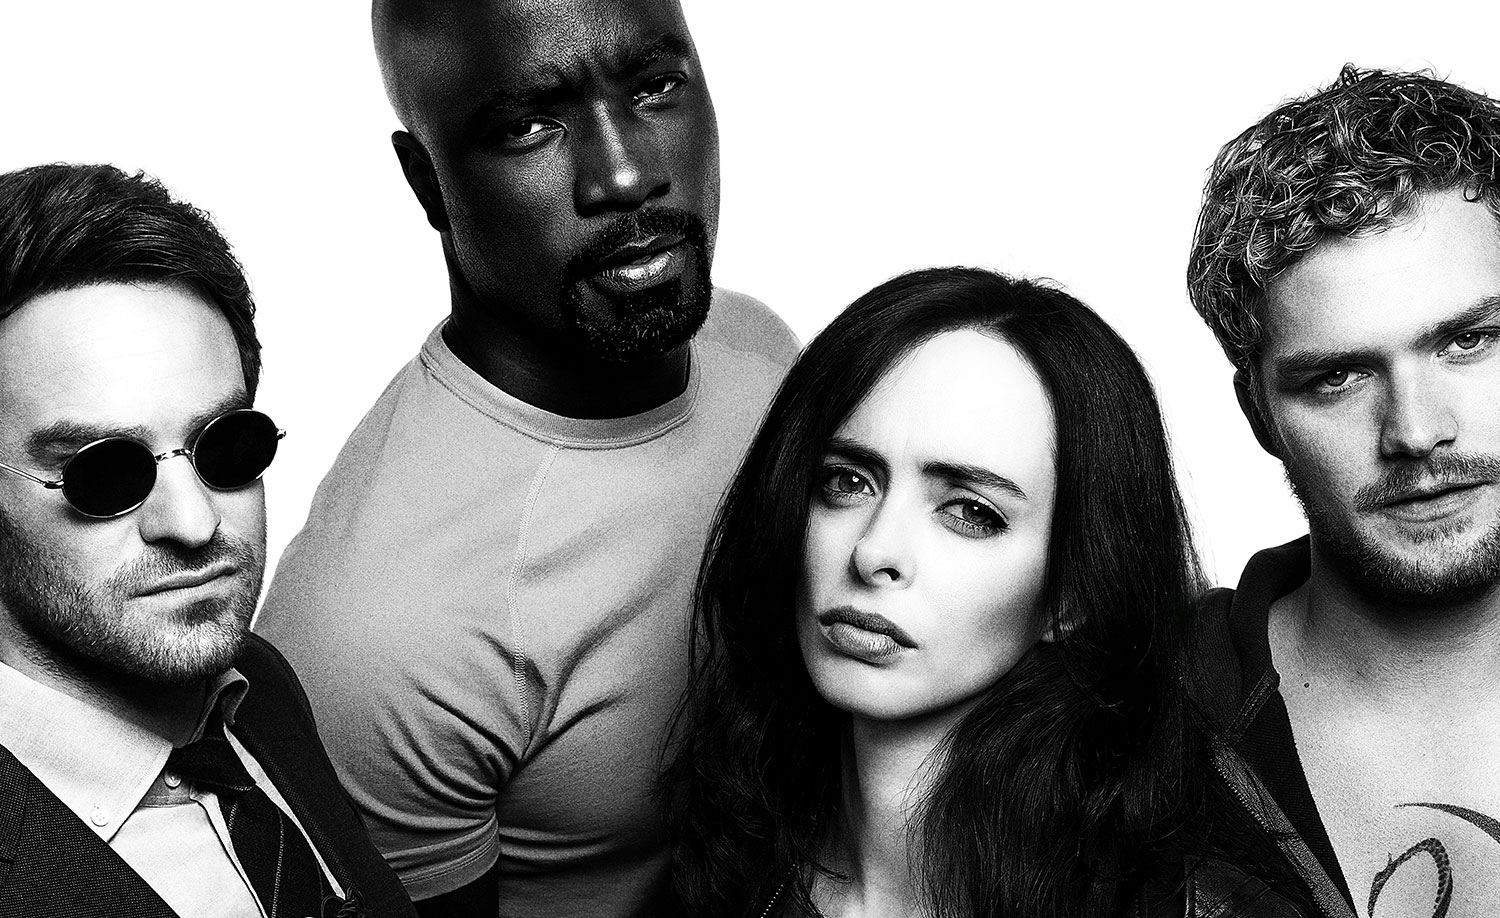 'Marvel's The Defenders' Gets Brand New, Badass Poster